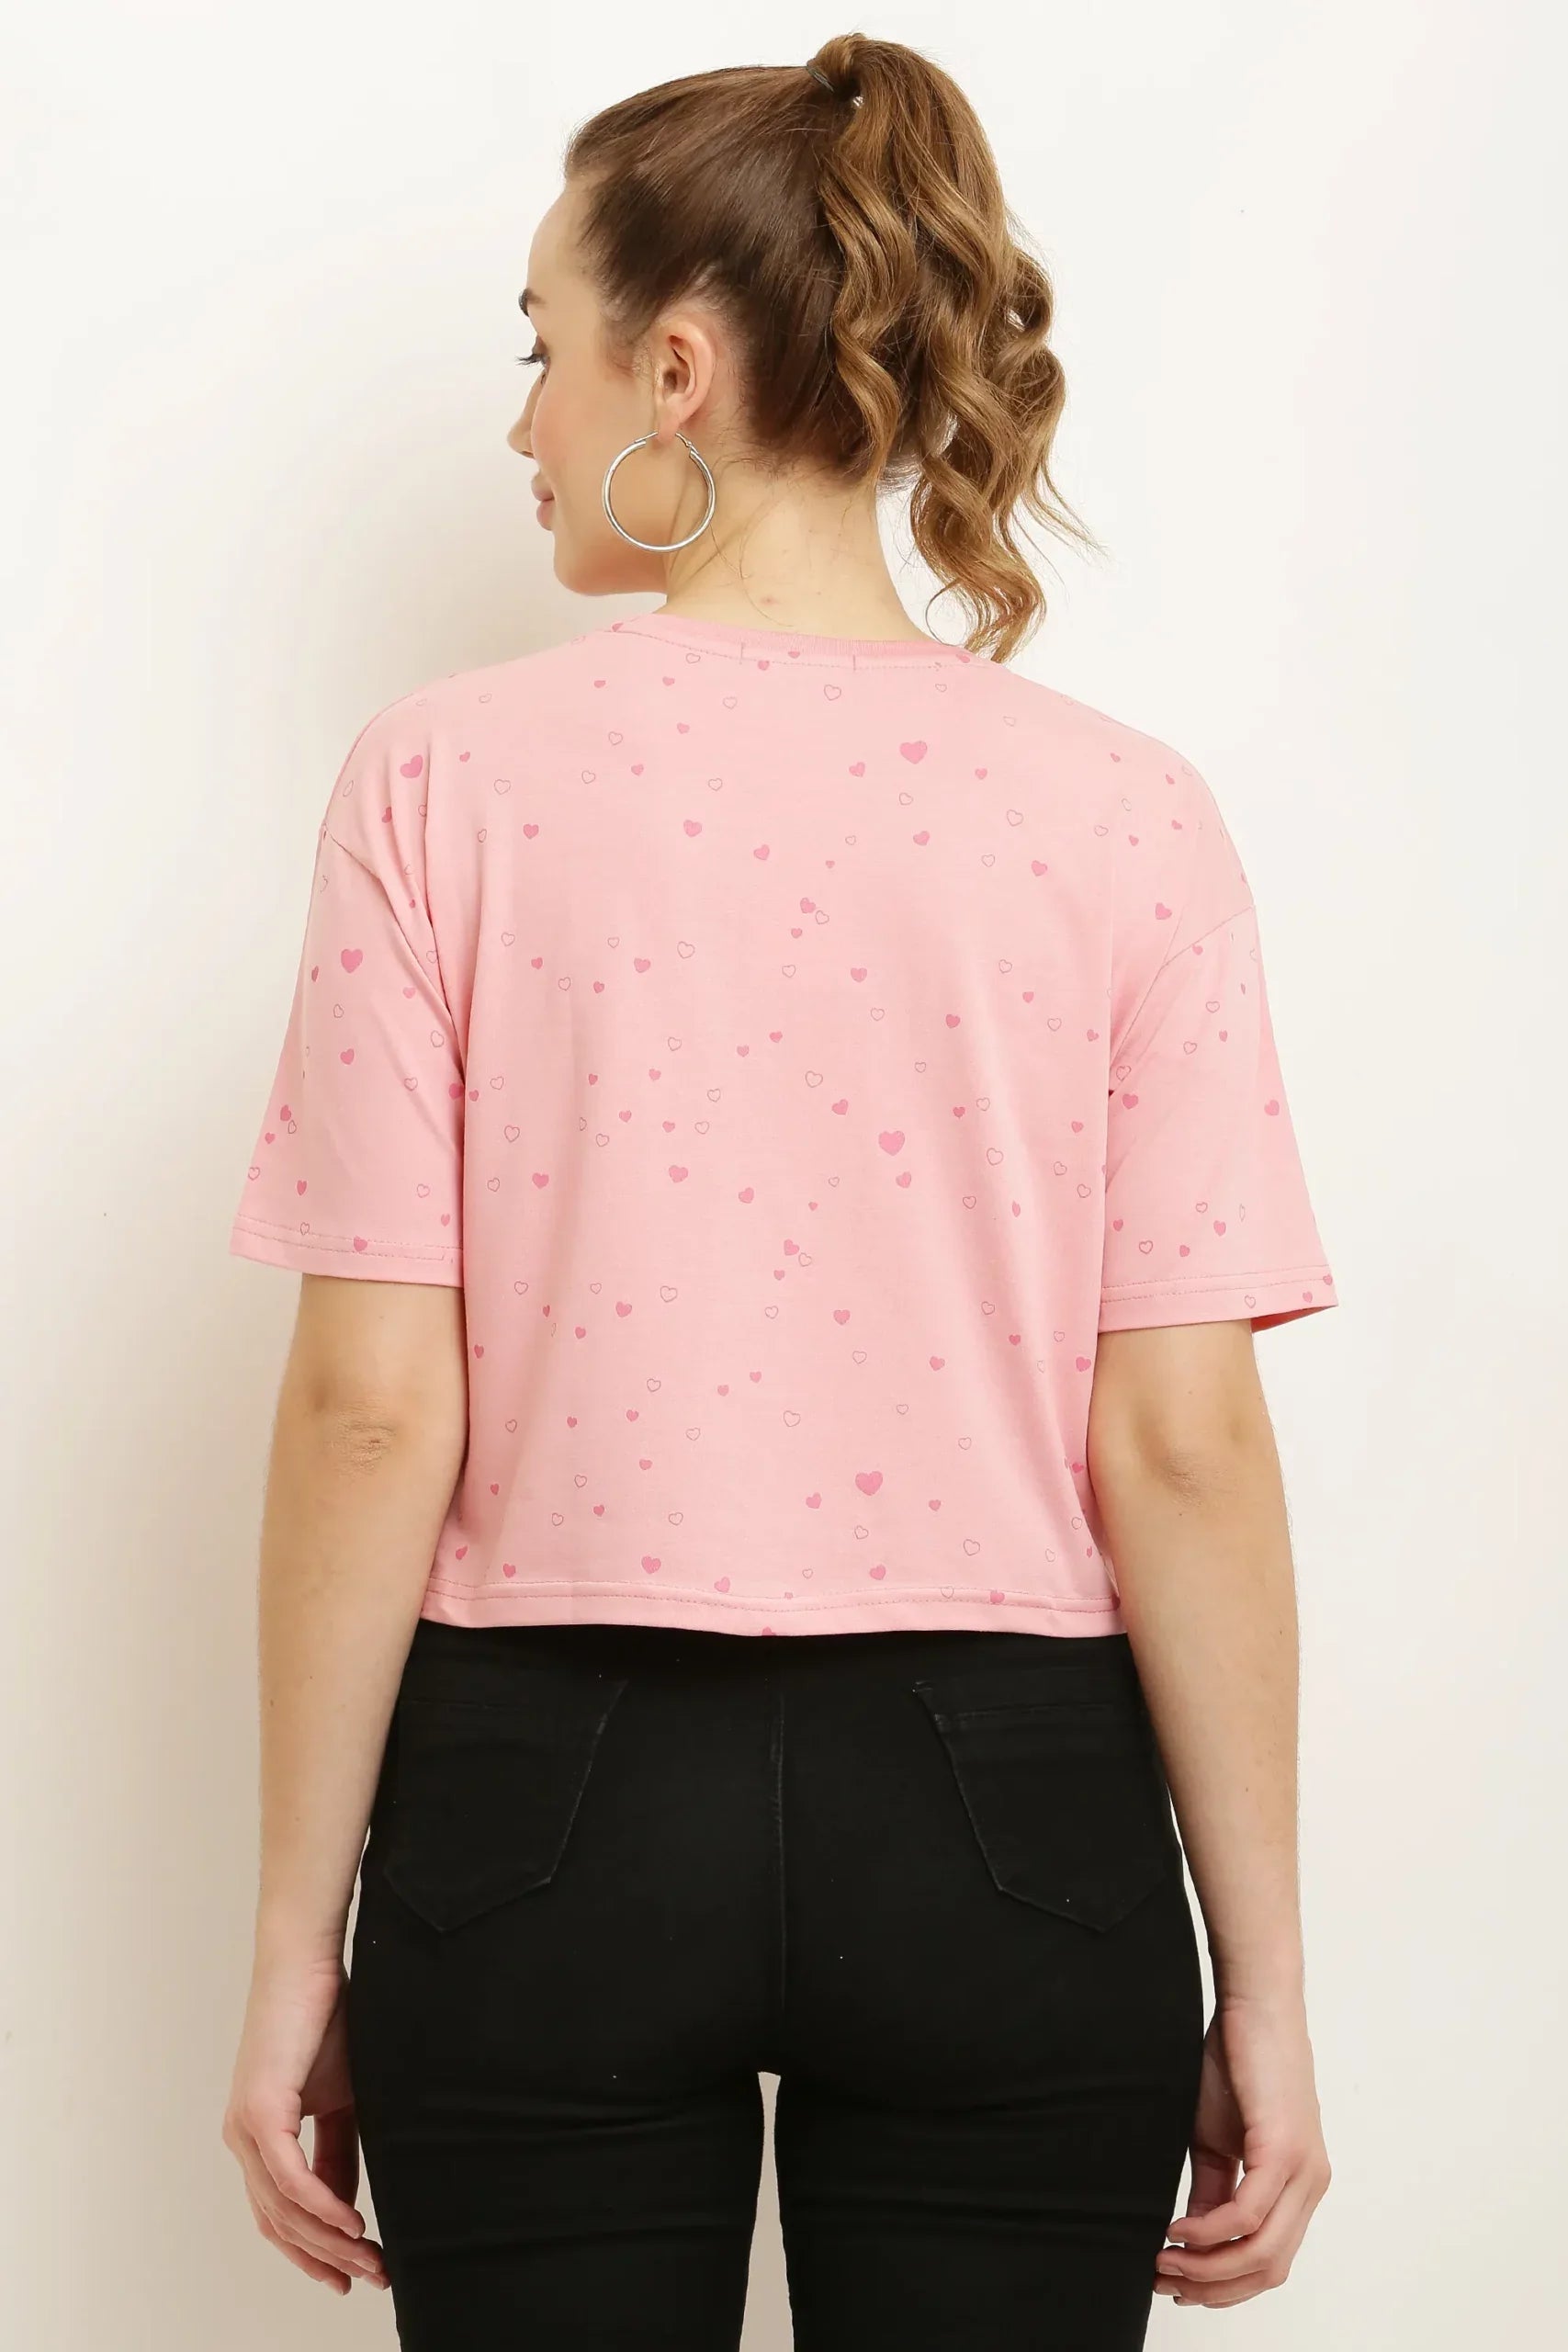 Beautiful Days (Rose Gold) Crop Tshirt - Embrace Everyday Beauty